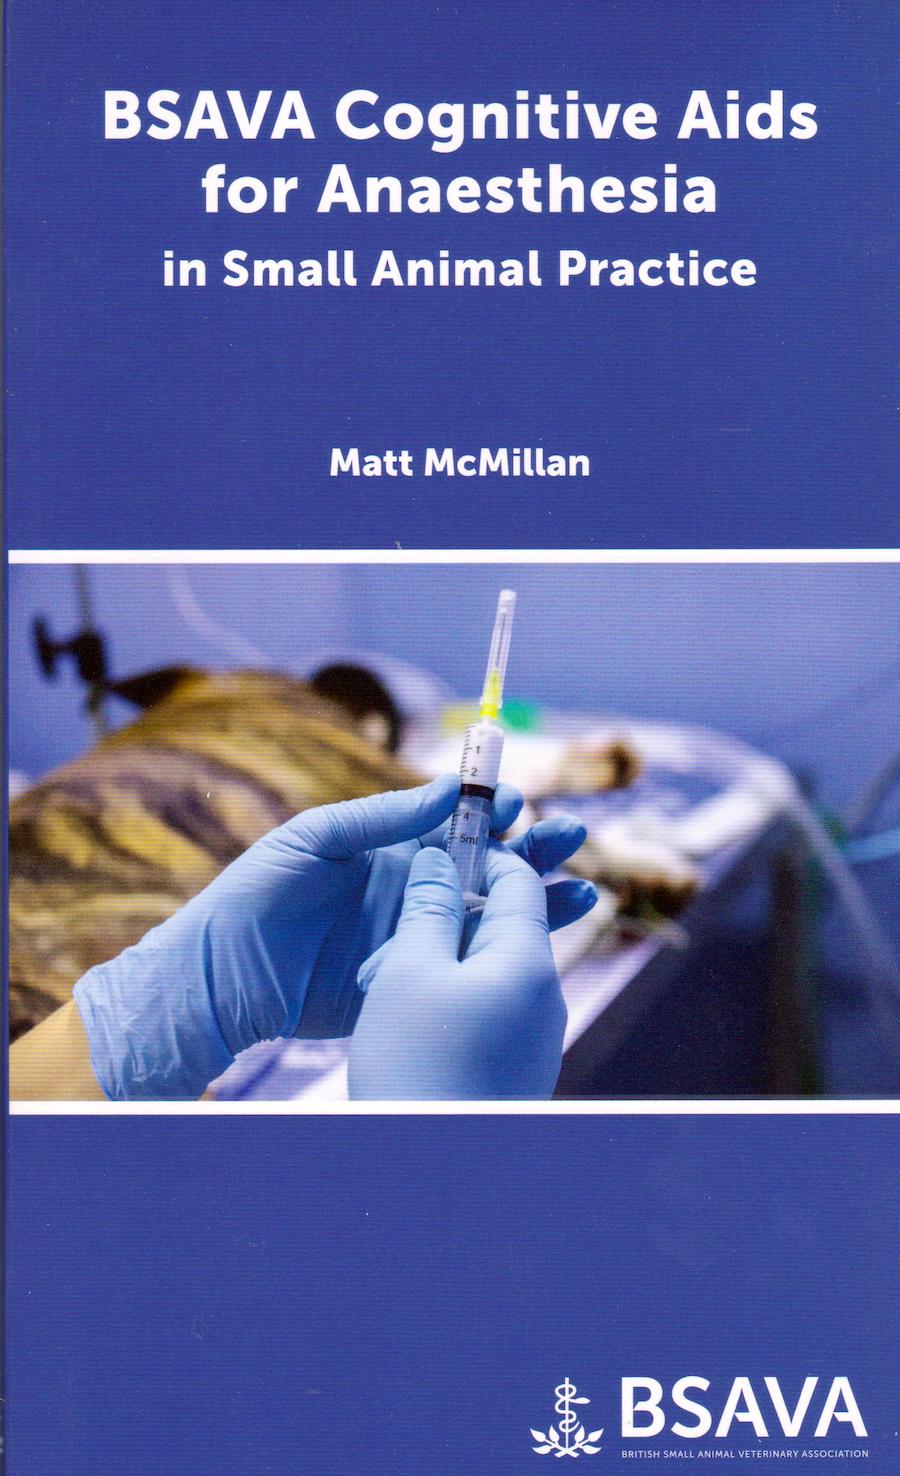 McMILLAN - BSAVA Cognitive aids for anaesthesia in small animal practice -  1st ed. - EV - Veterinary Books